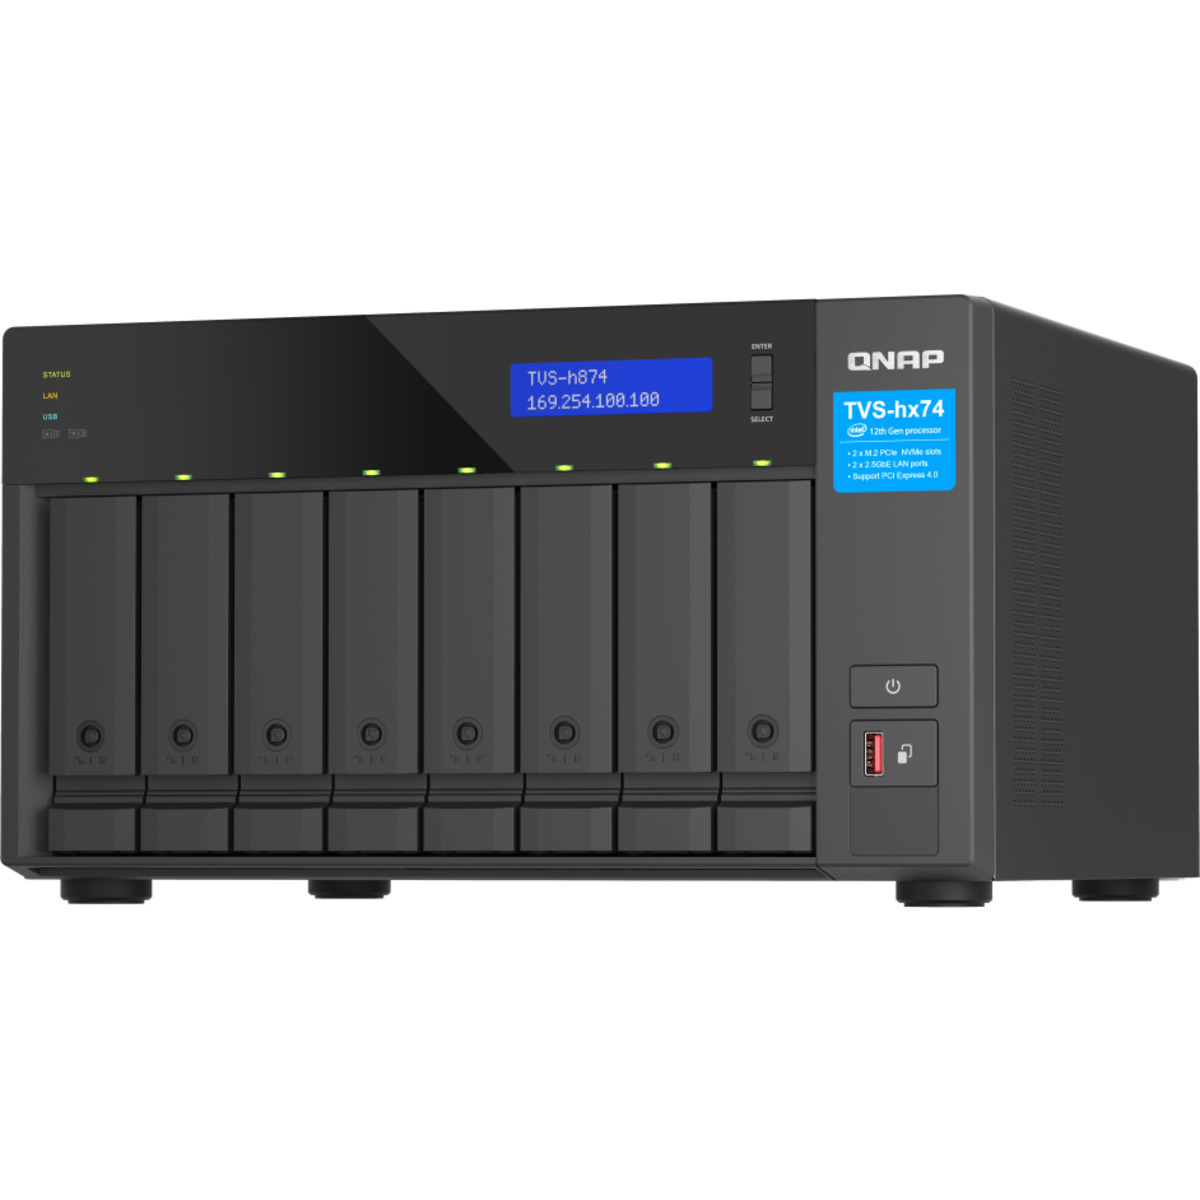 buy QNAP TVS-h874 Core i7 176tb Desktop NAS - Network Attached Storage Device 8x22000gb Seagate IronWolf Pro ST22000NT001 3.5 7200rpm SATA 6Gb/s HDD NAS Class Drives Installed - Burn-In Tested - nas headquarters buy network attached storage server device das new raid-5 free shipping simply usa TVS-h874 Core i7